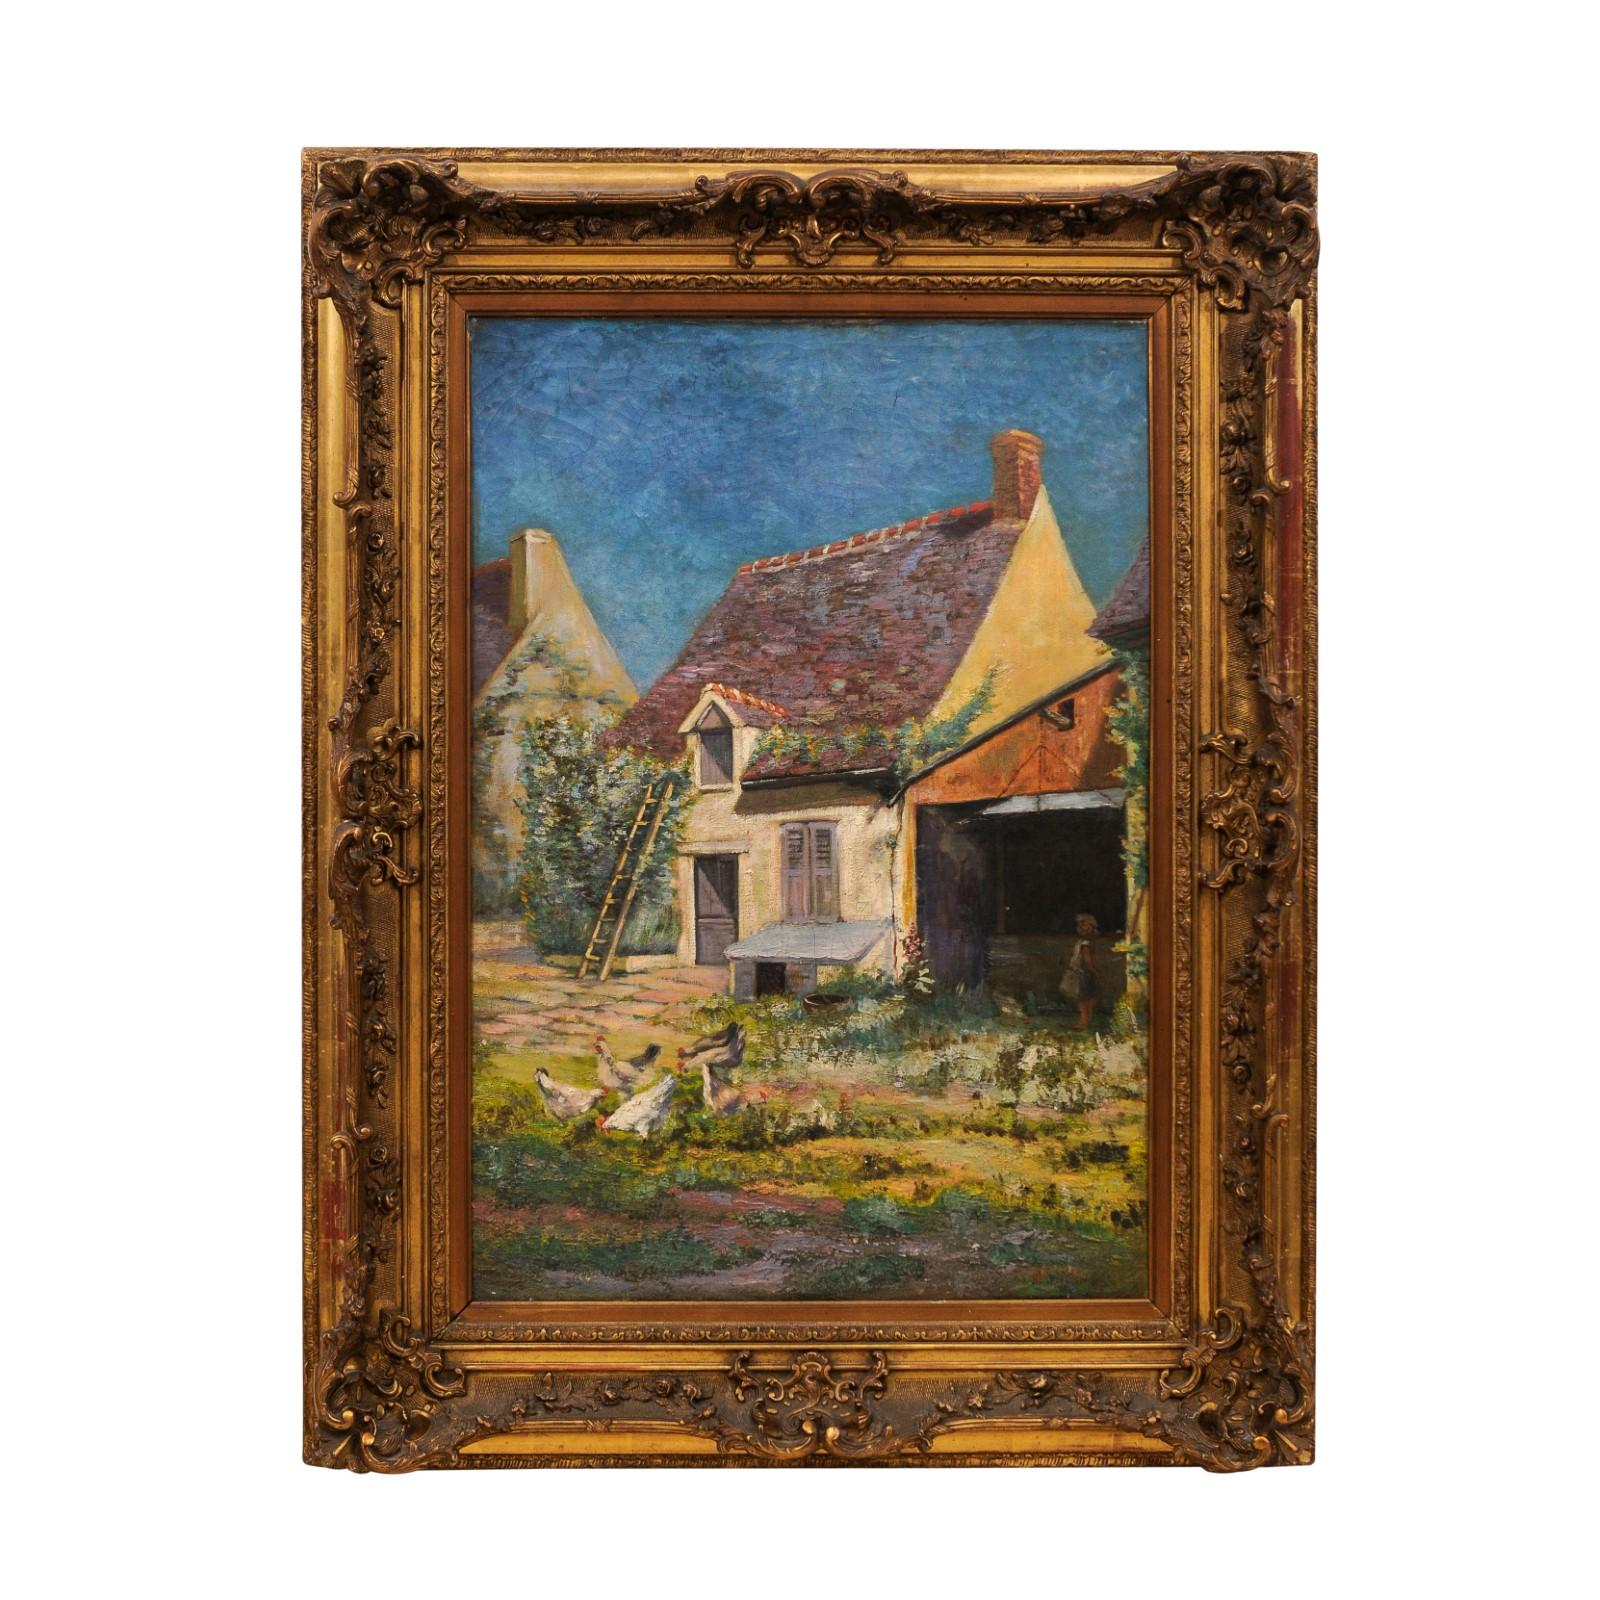 A framed French farmyard scene from the 20th century, by H. Greilschmez. Created in France during the 20th century, this vertical painting features a humble farmyard scene depicting a few houses with slanted roofs standing out beautifully on a blue